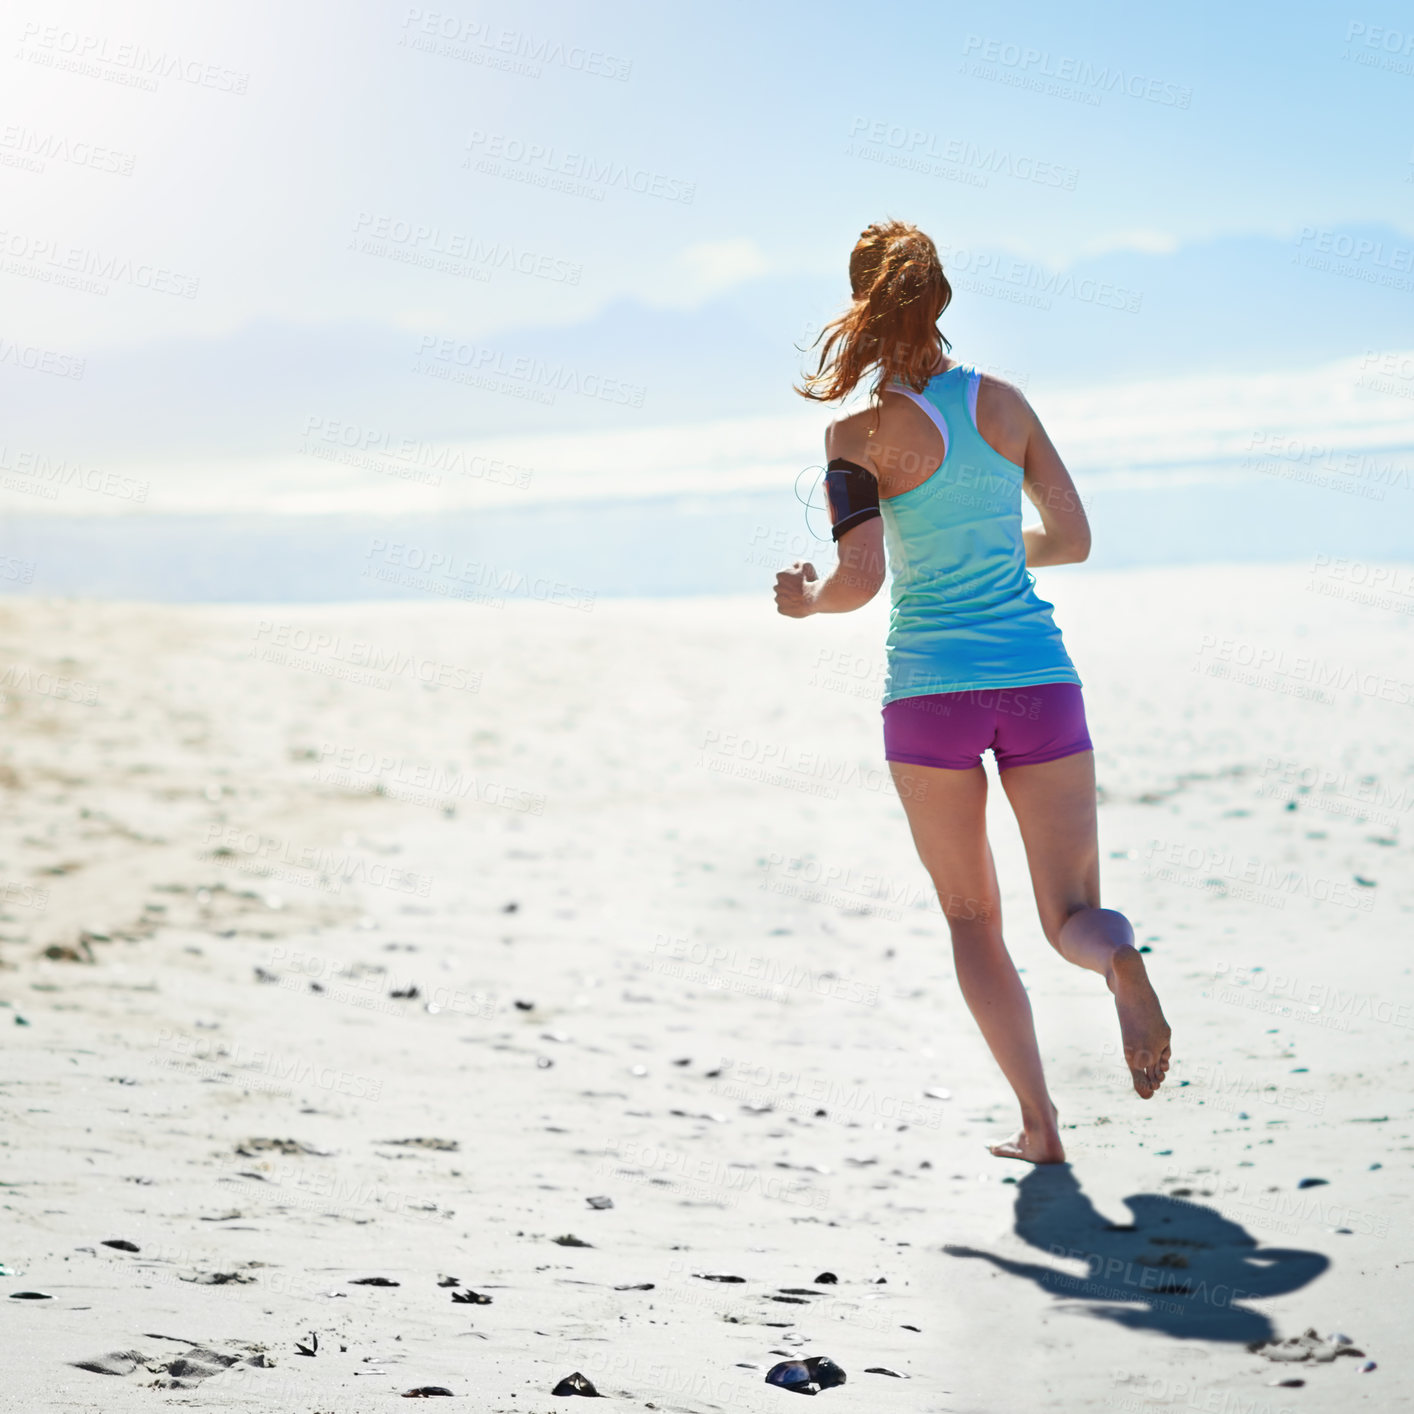 Buy stock photo Fitness, woman and running on sandy beach for healthy exercise, workout or cardio training in the outdoors. Active female runner or athlete exercising on a run for health and wellness on ocean mockup